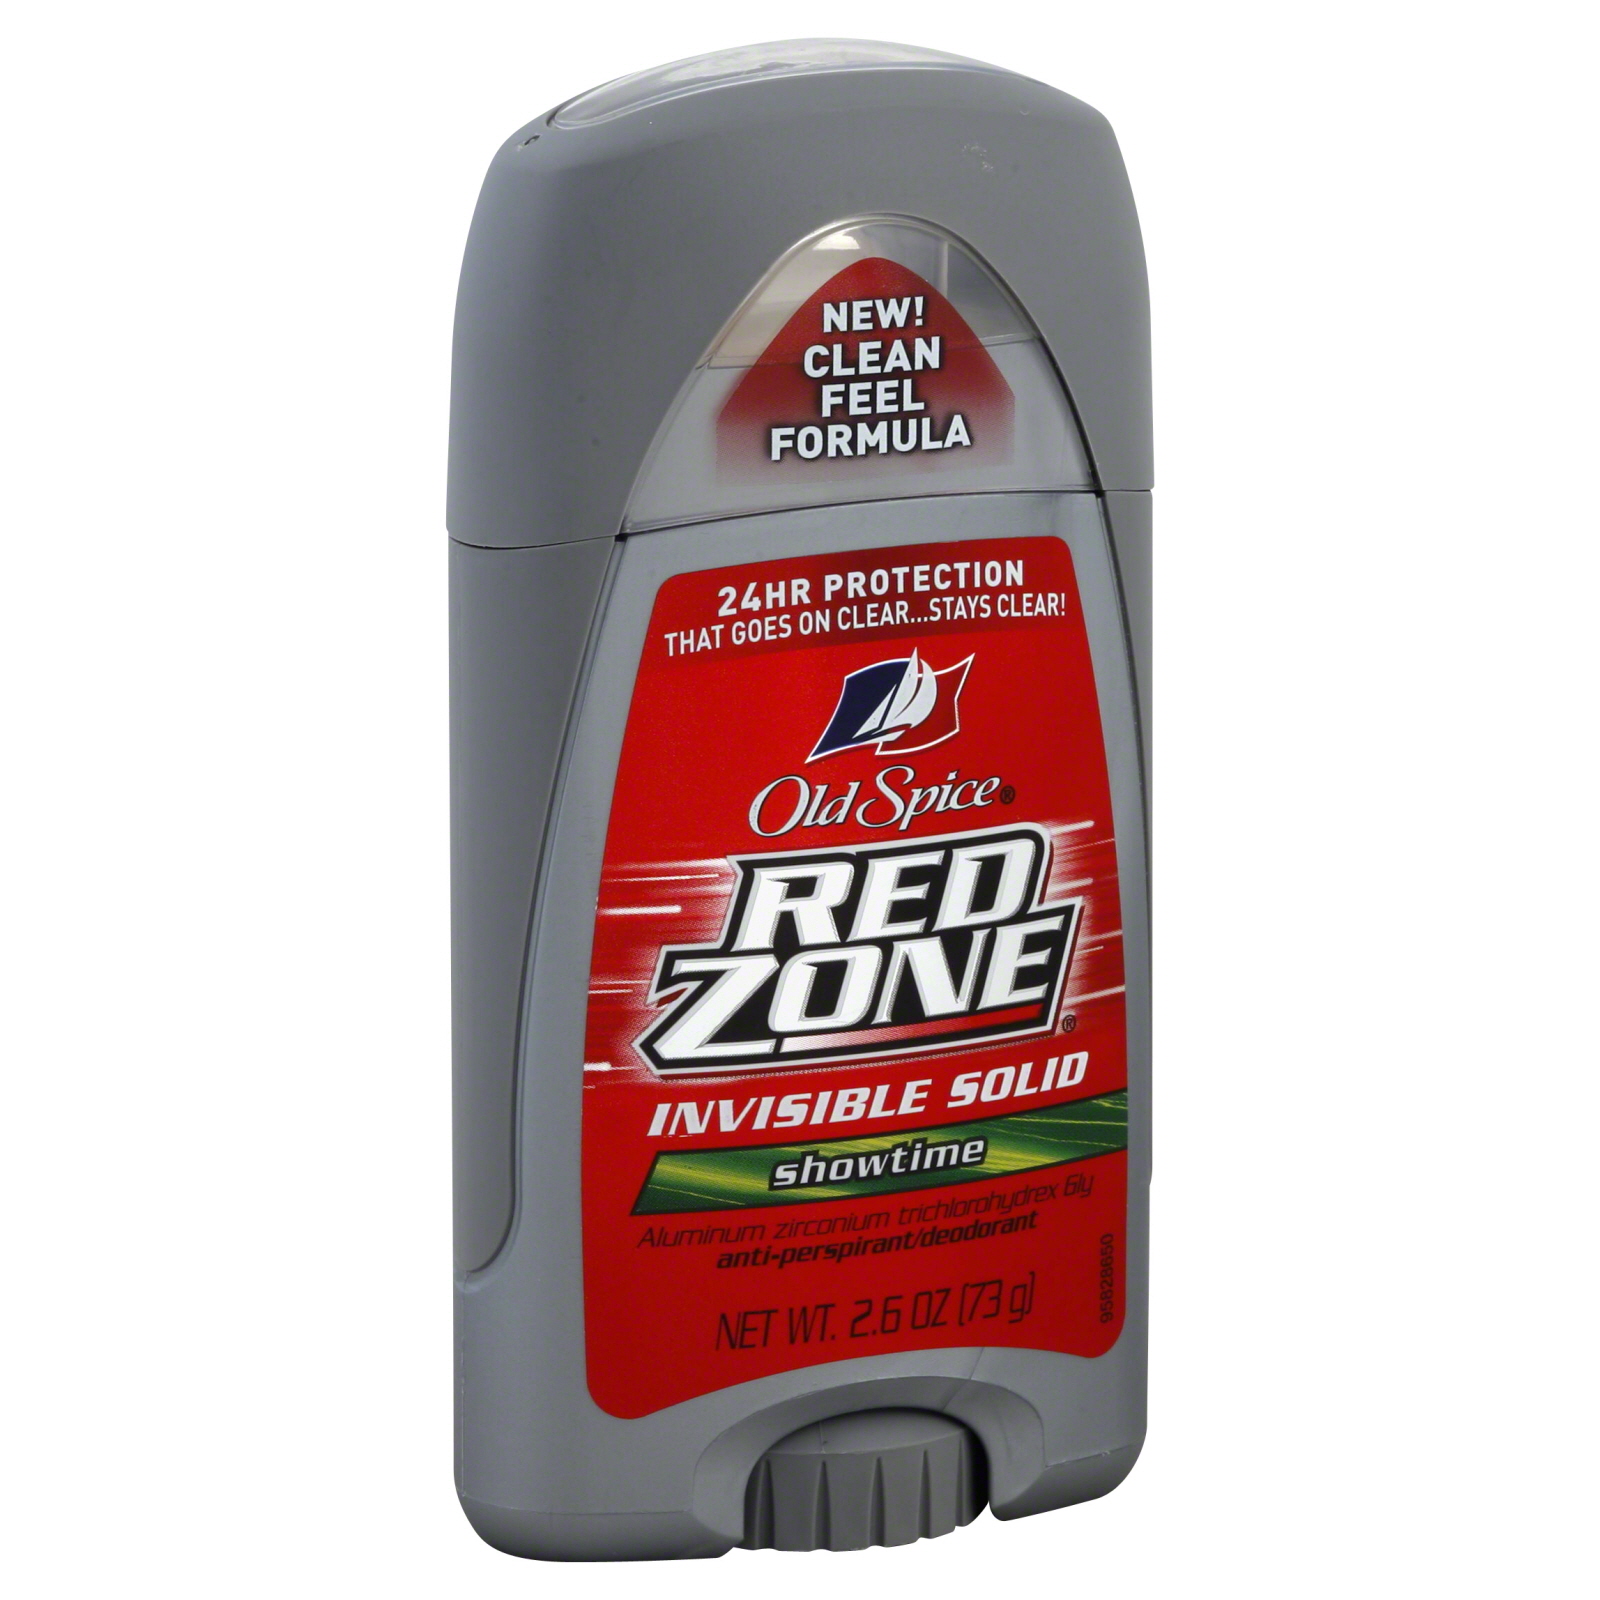 Old Spice Red Zone Anti-Perspirant/Deodorant, Invisible Solid, Showtime, 2.6 oz (73 g)